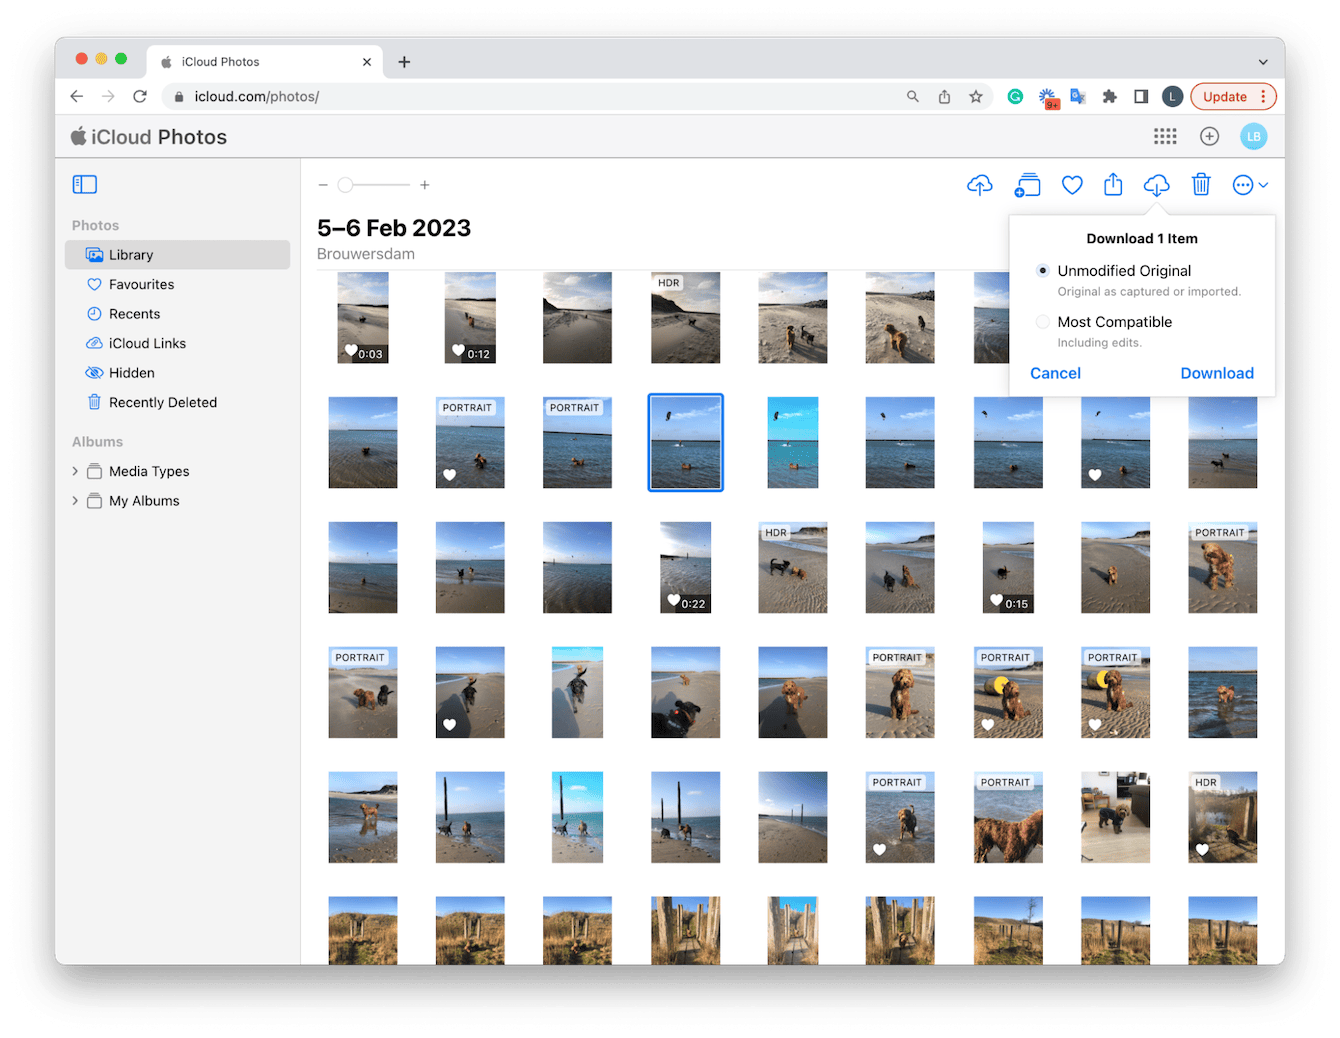 download more than 1000 photos from icloud to mac